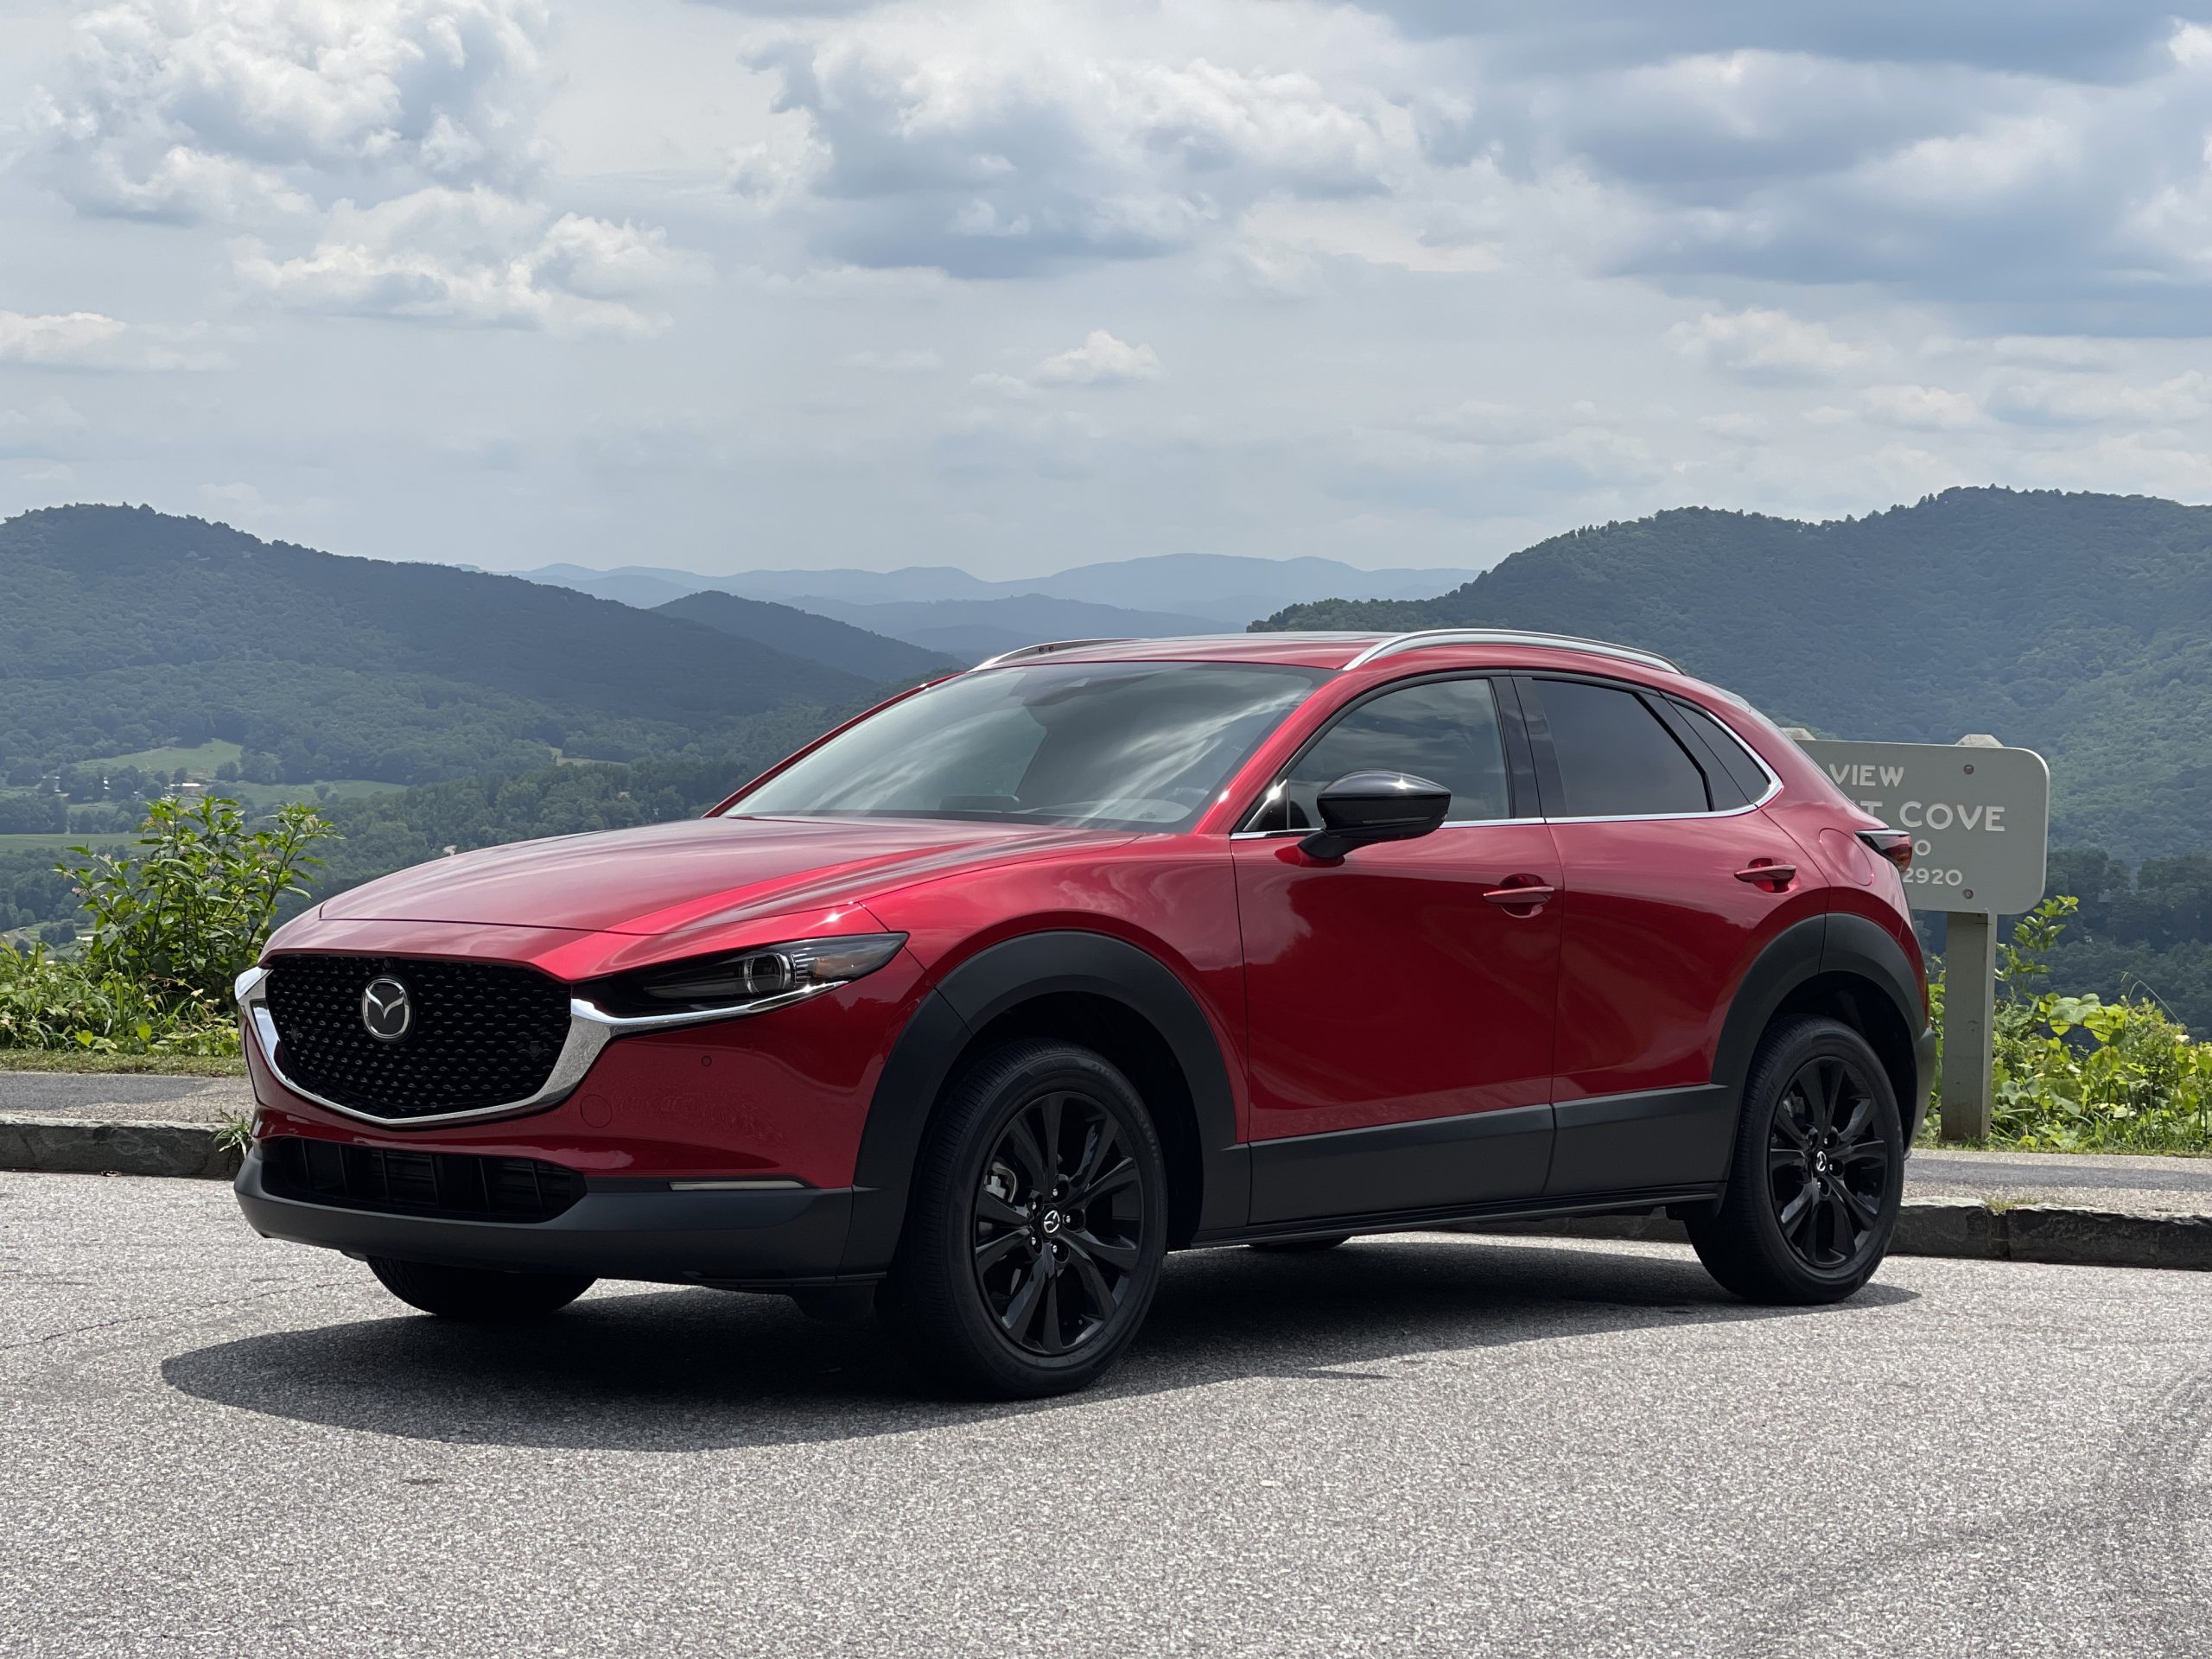 The 2021 Mazda CX-30 Turbo parked in front of a mountain view